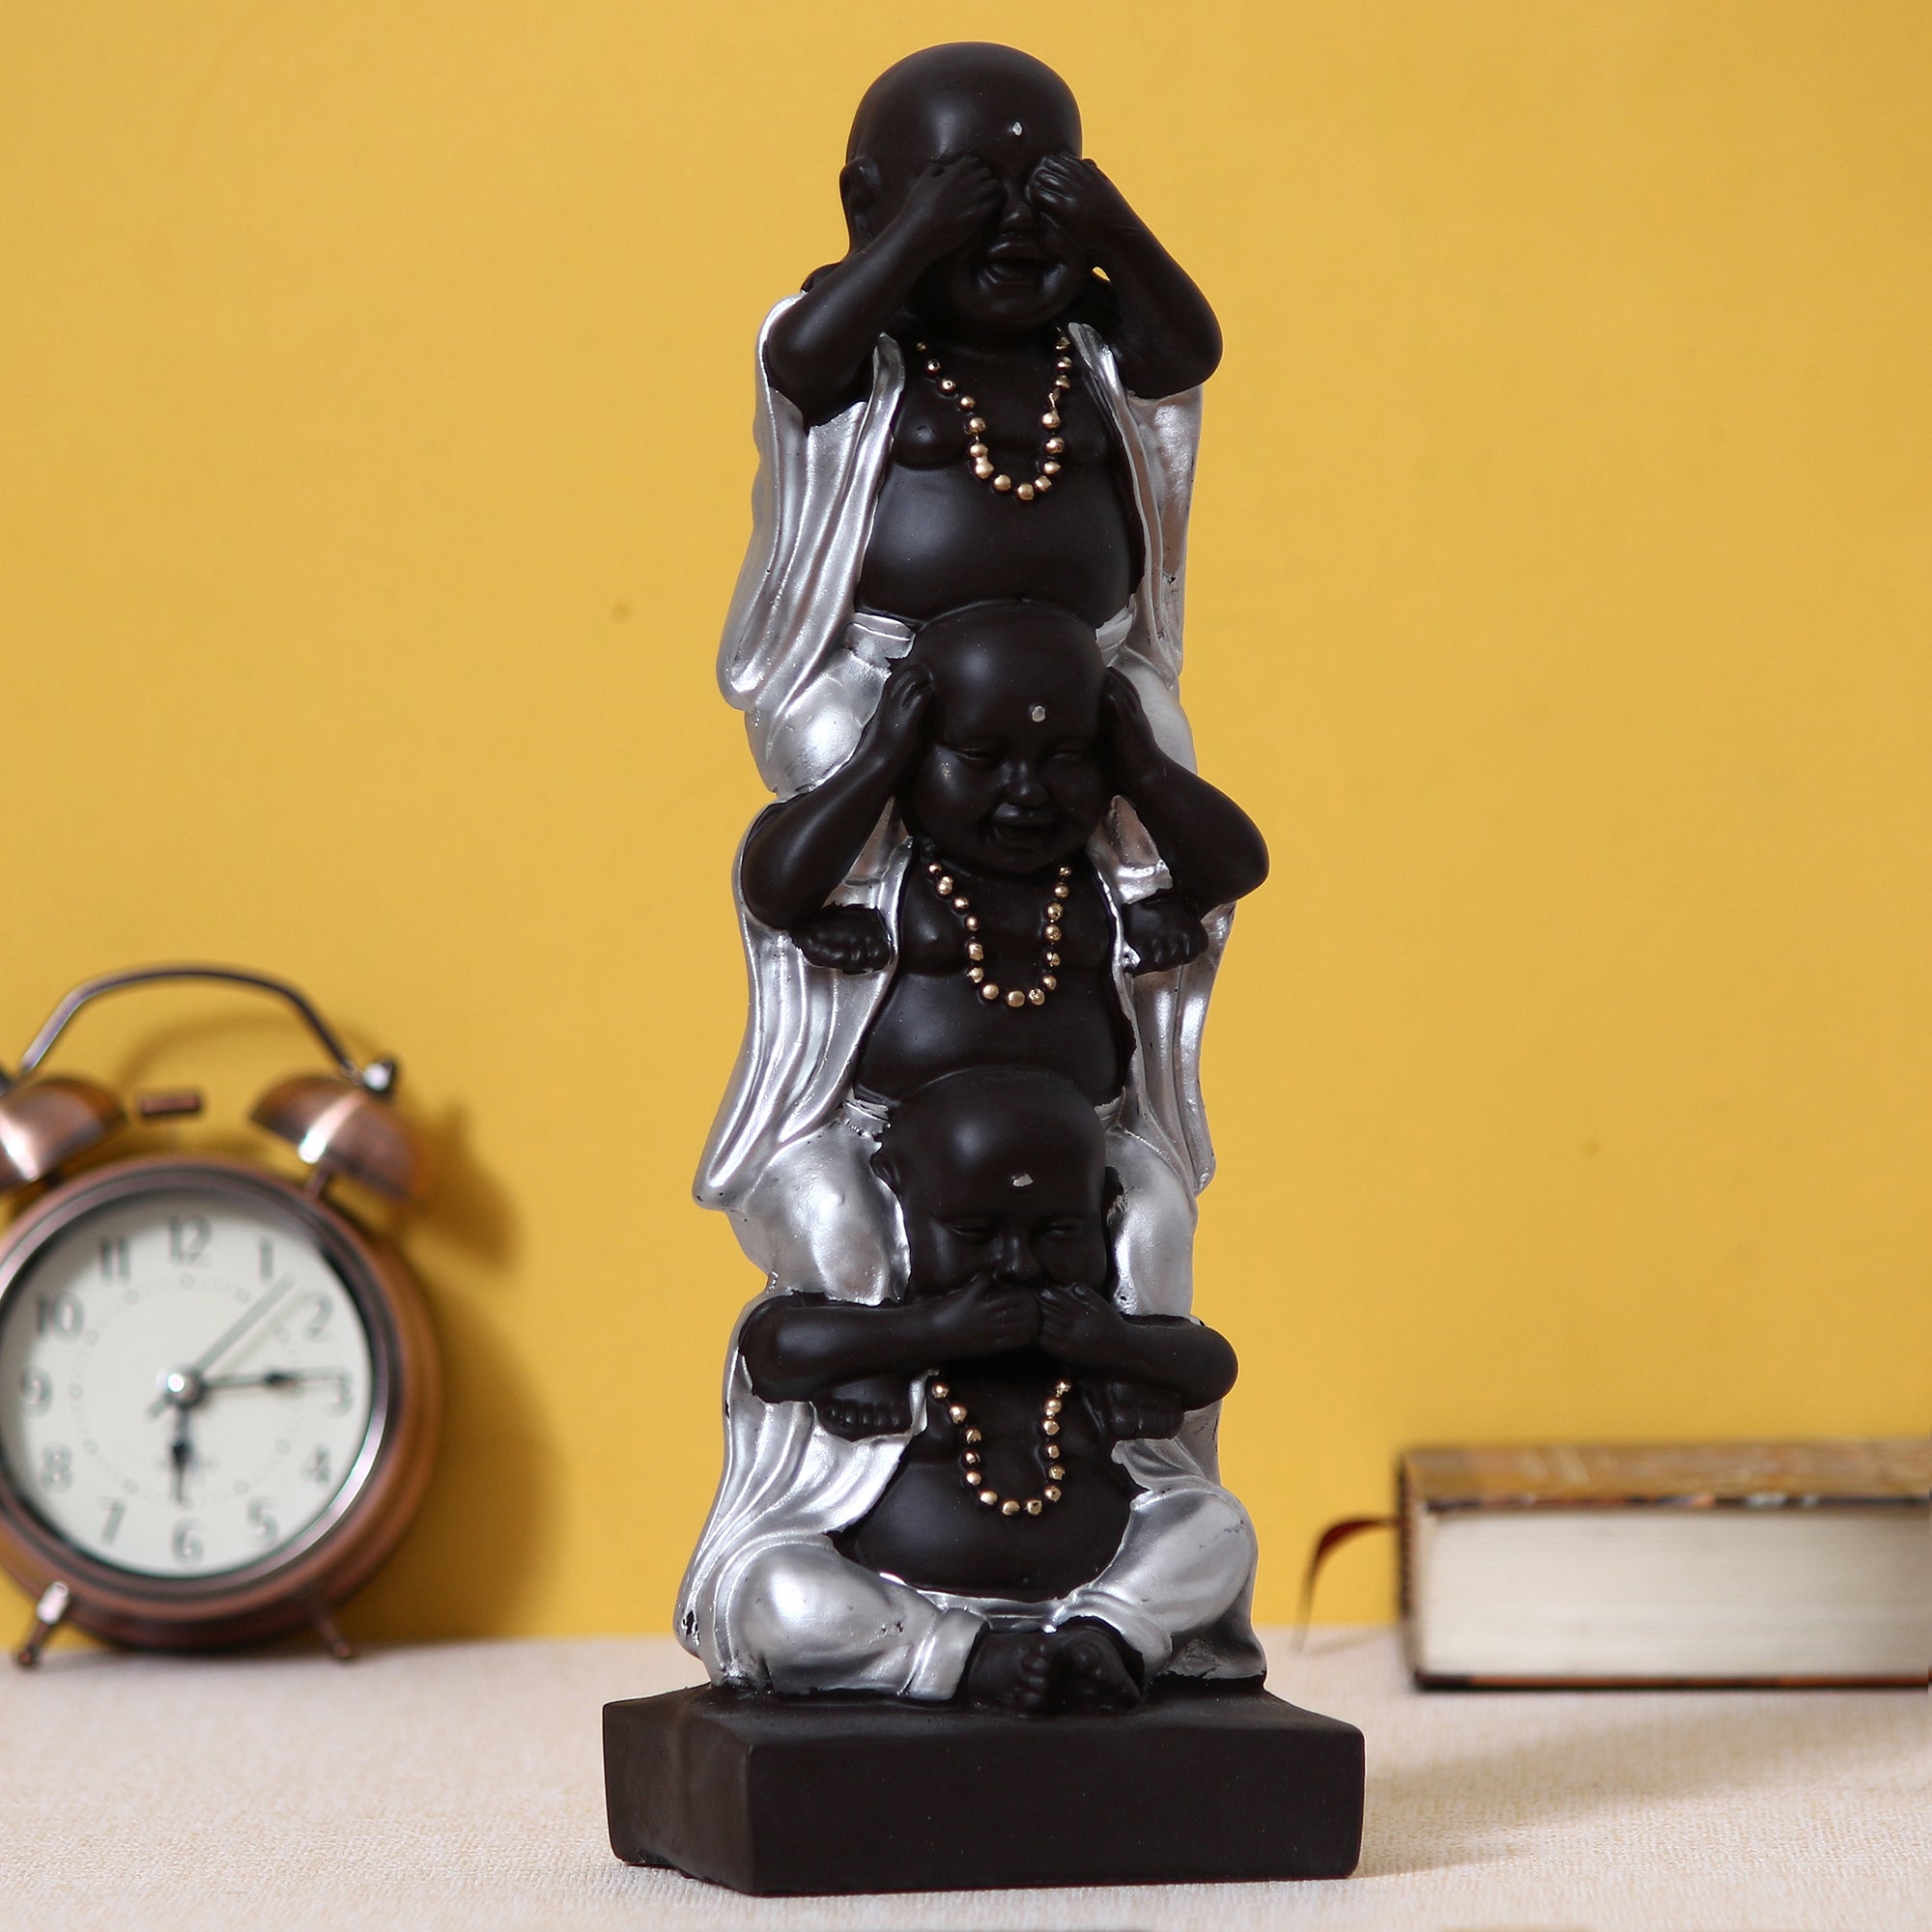 Polyresin Silver and Black Set of 3 Laughing Buddha Idol Standing on each other Decorative Showpiece 6